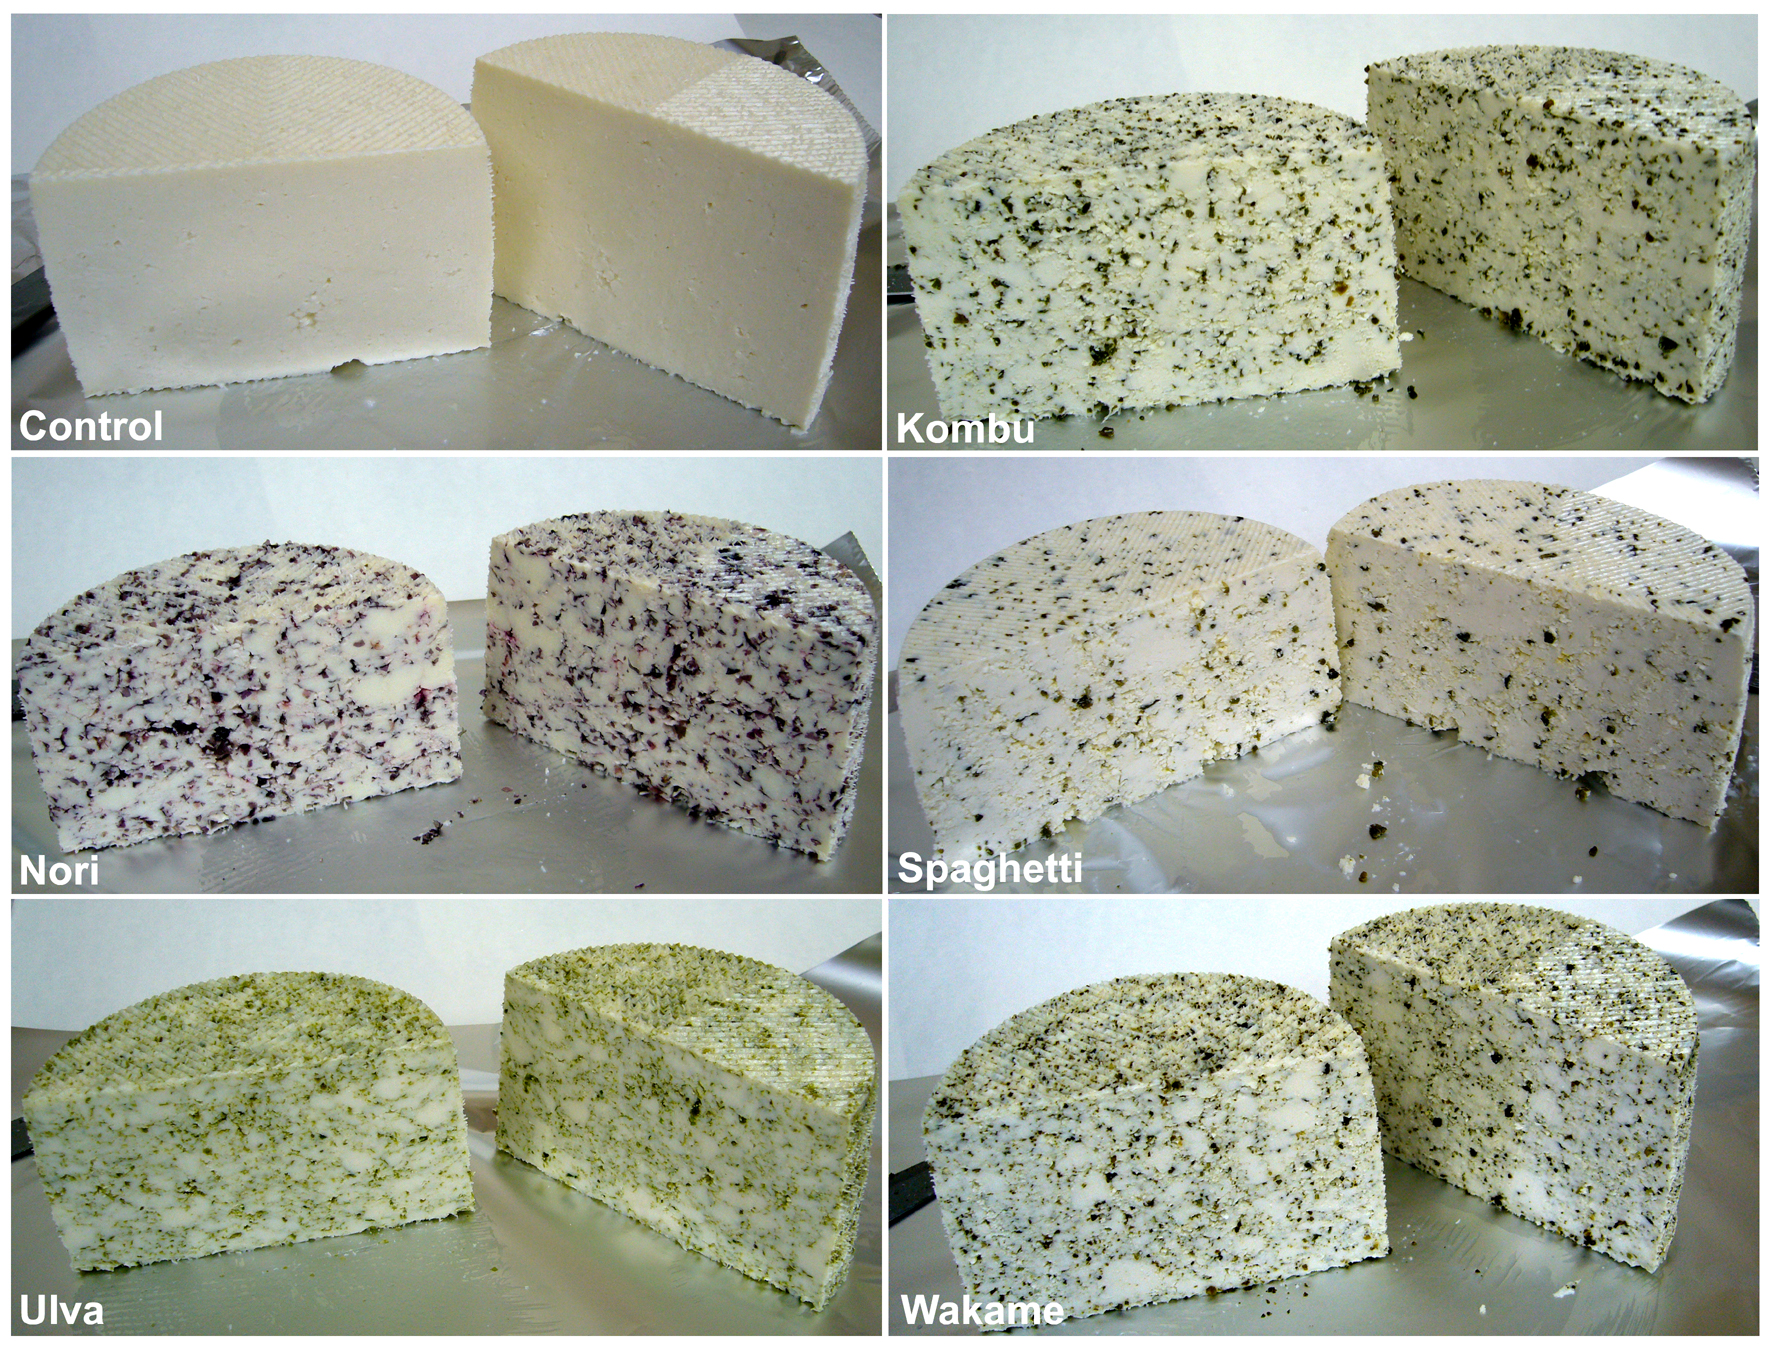 Semi-hard cheeses made with different seaweeds